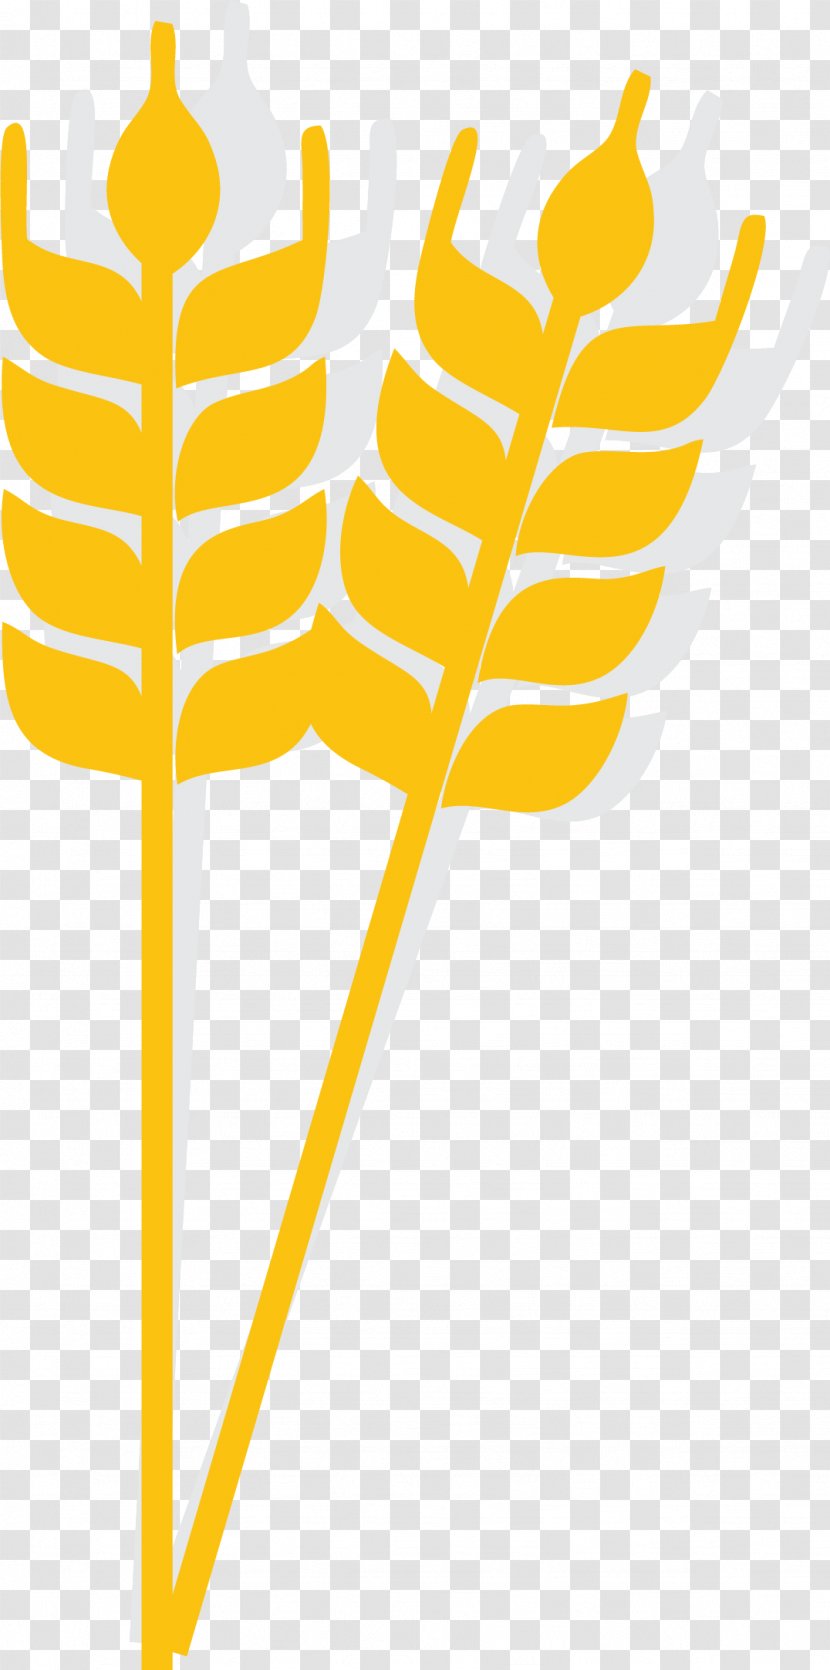 Rice Cartoon Wheat Icon - Text - Gold Spike Transparent PNG